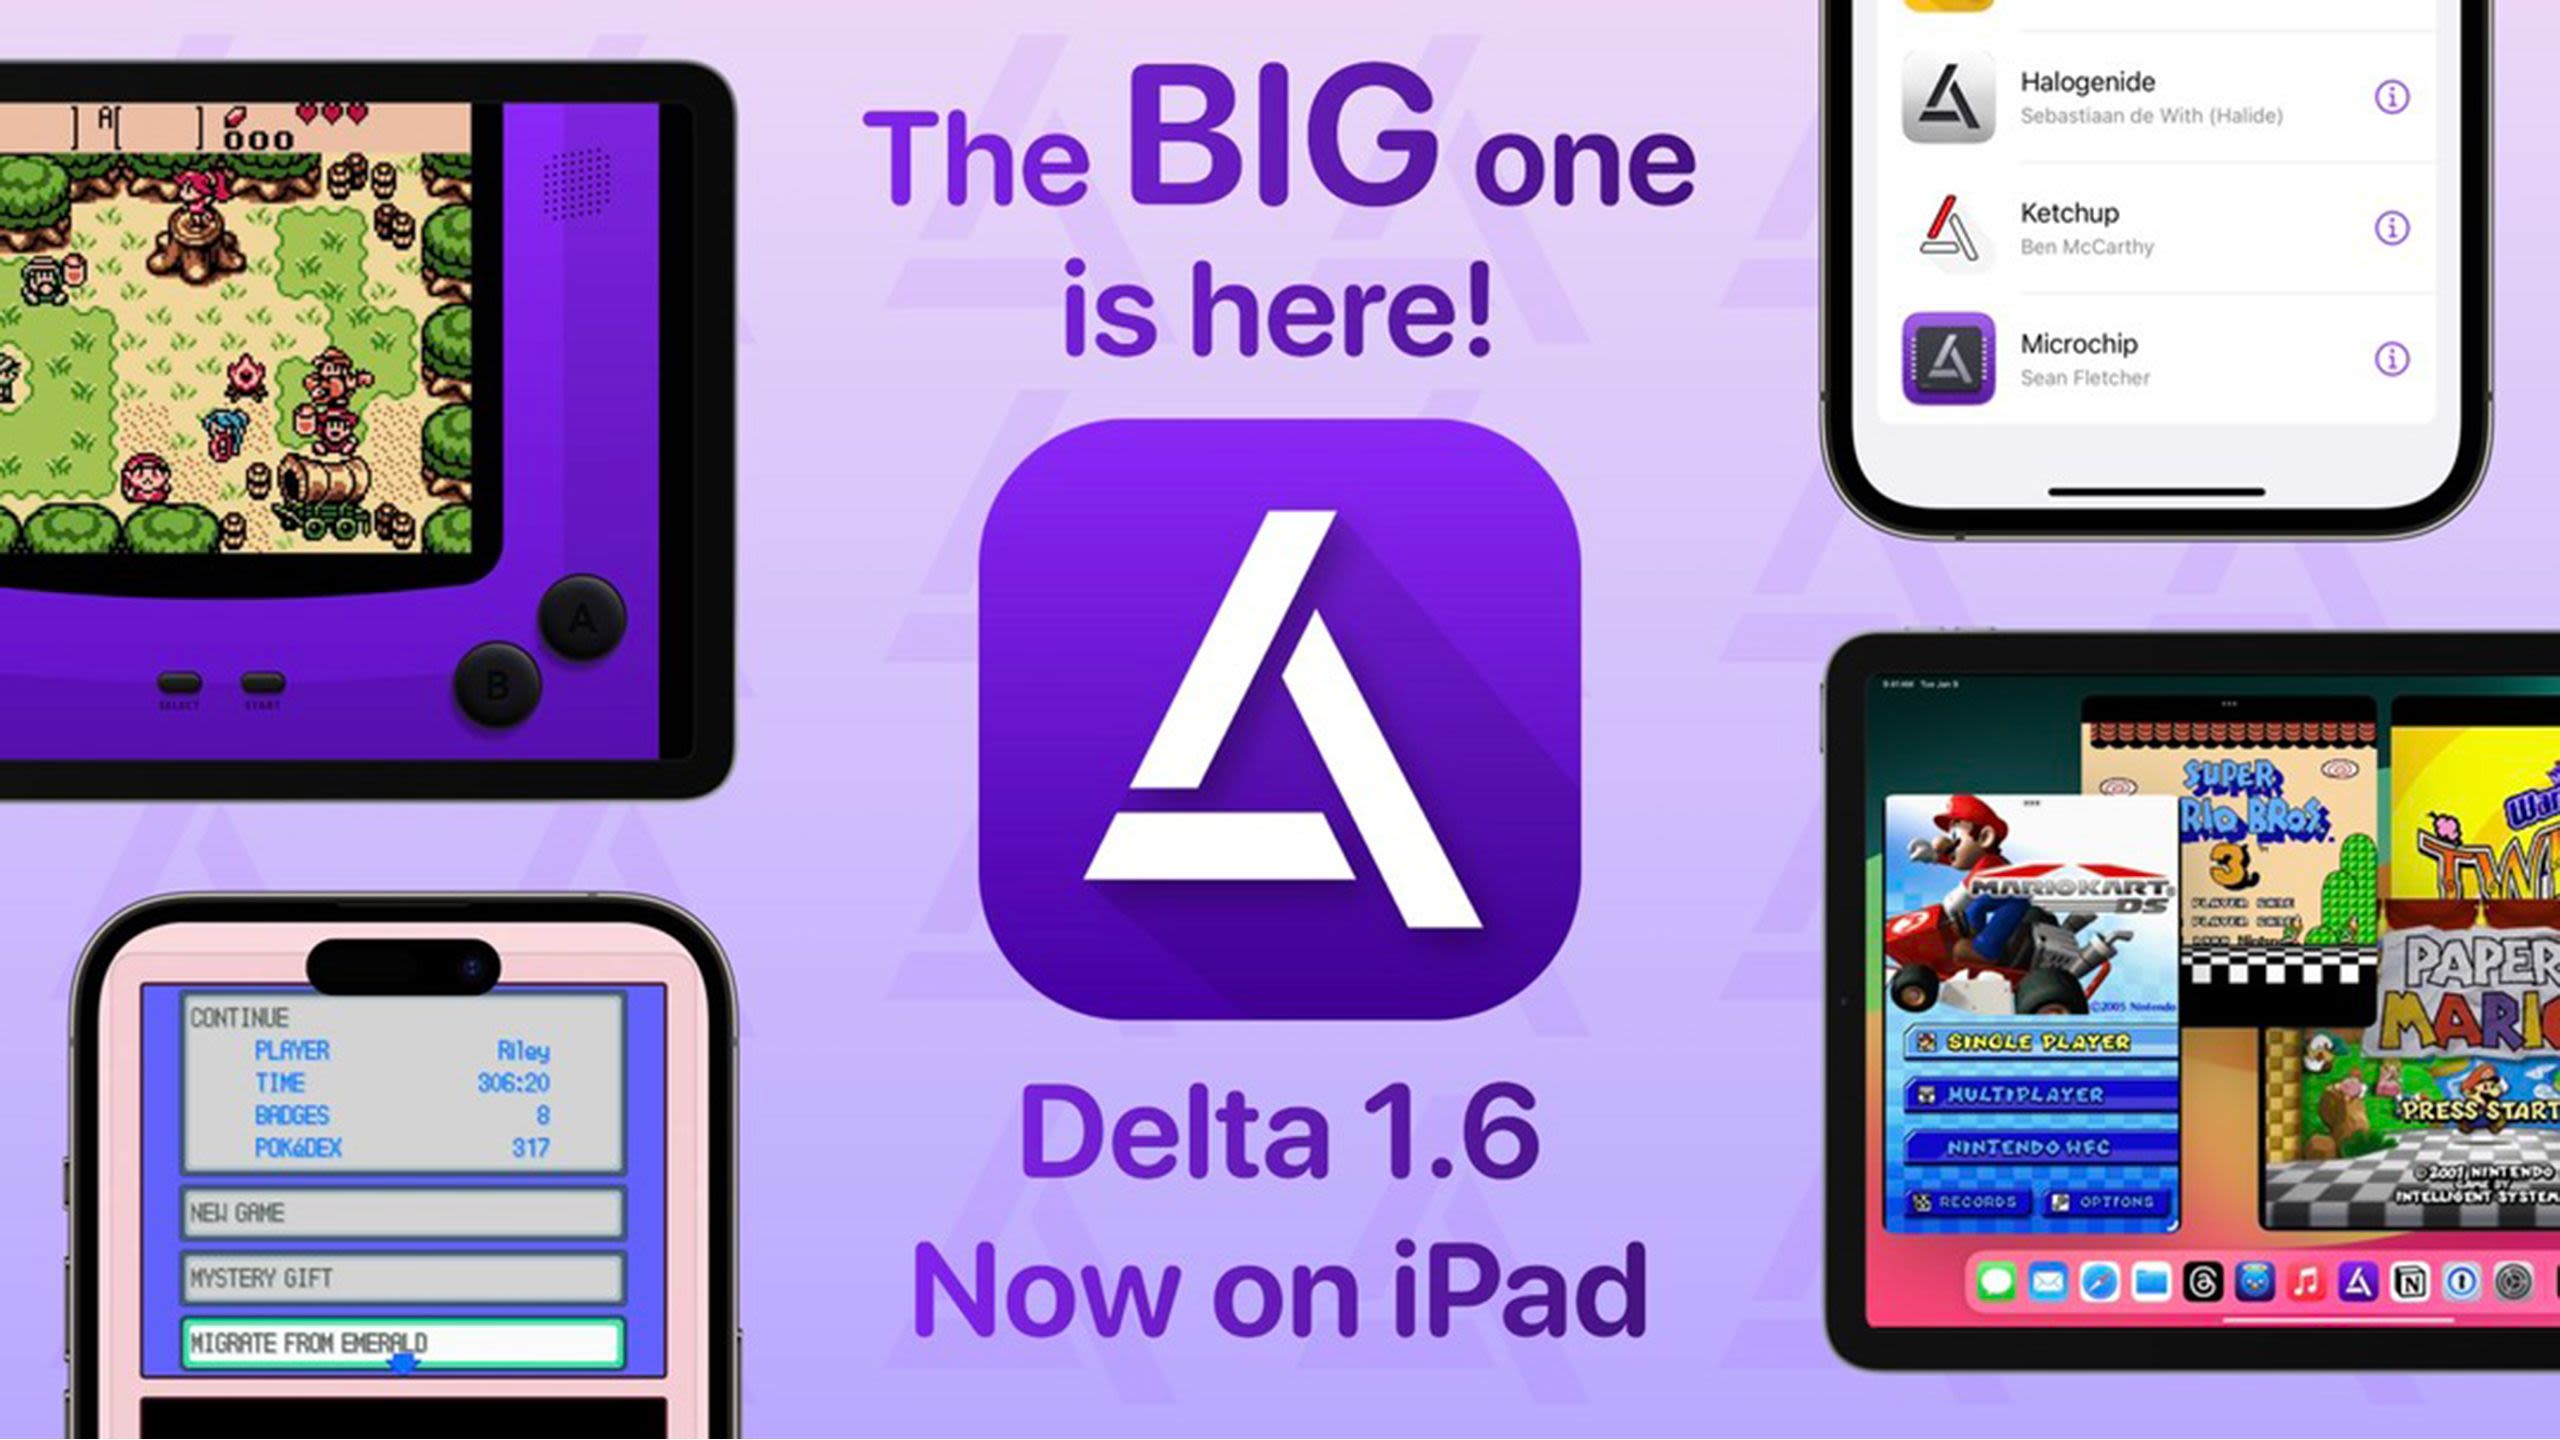 The Delta emulator is now fully optimized for iPad including Split View and Handoff